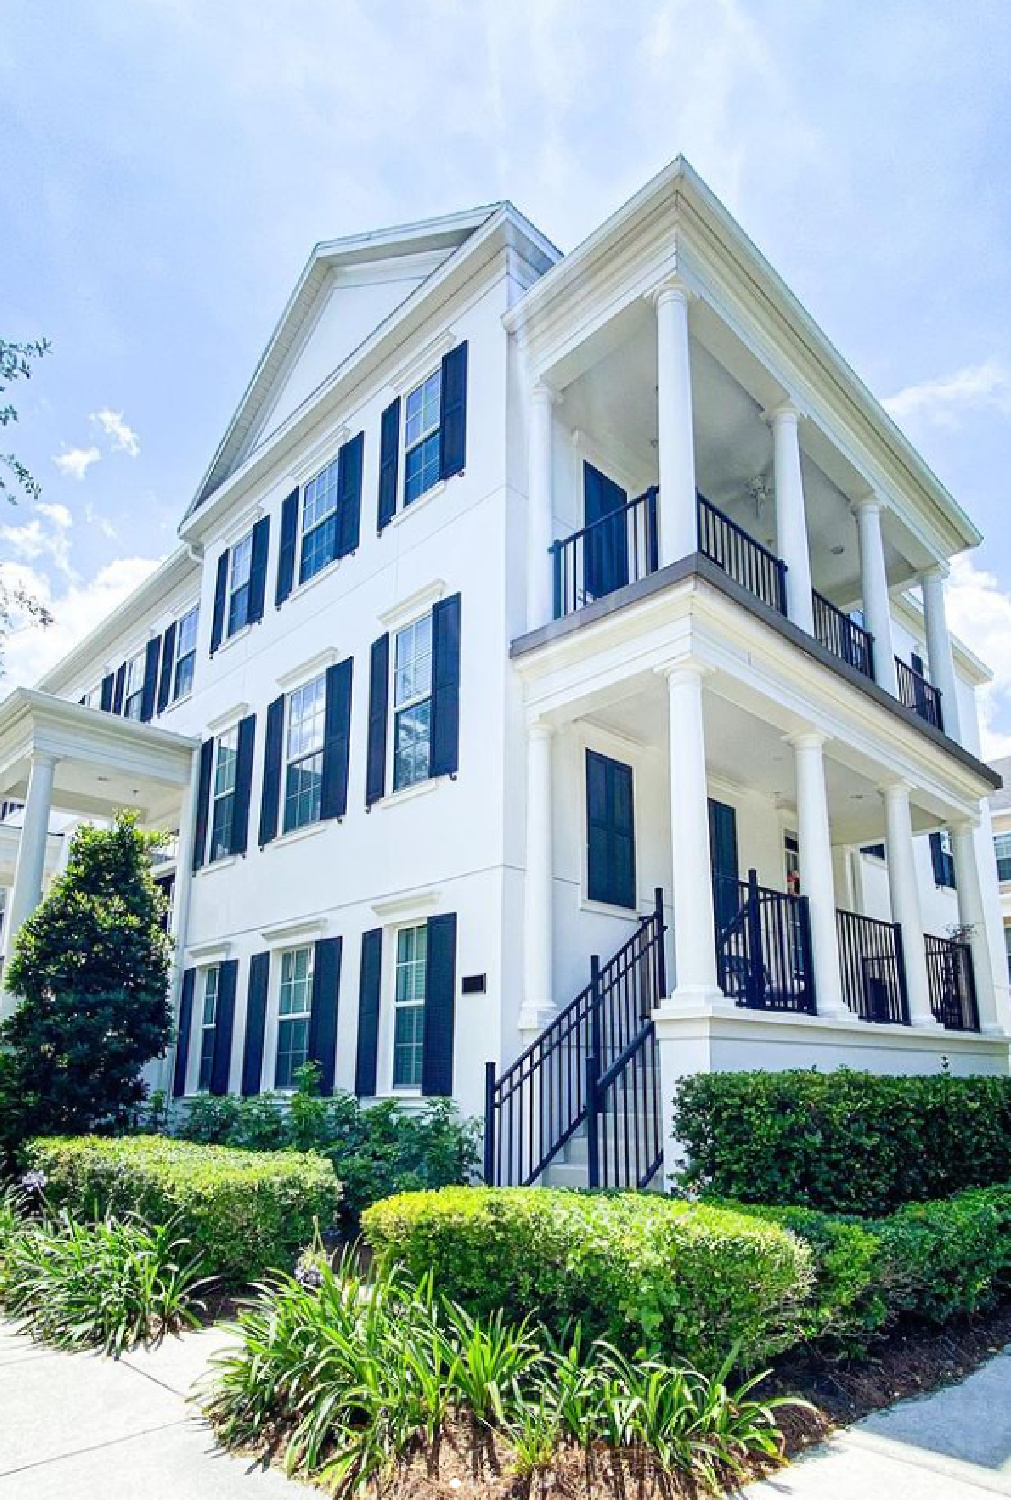 Chantilly Lace white painted house exterior with black shutters - @drs.inc. #whitehouses #chantillylace #houseexteriors